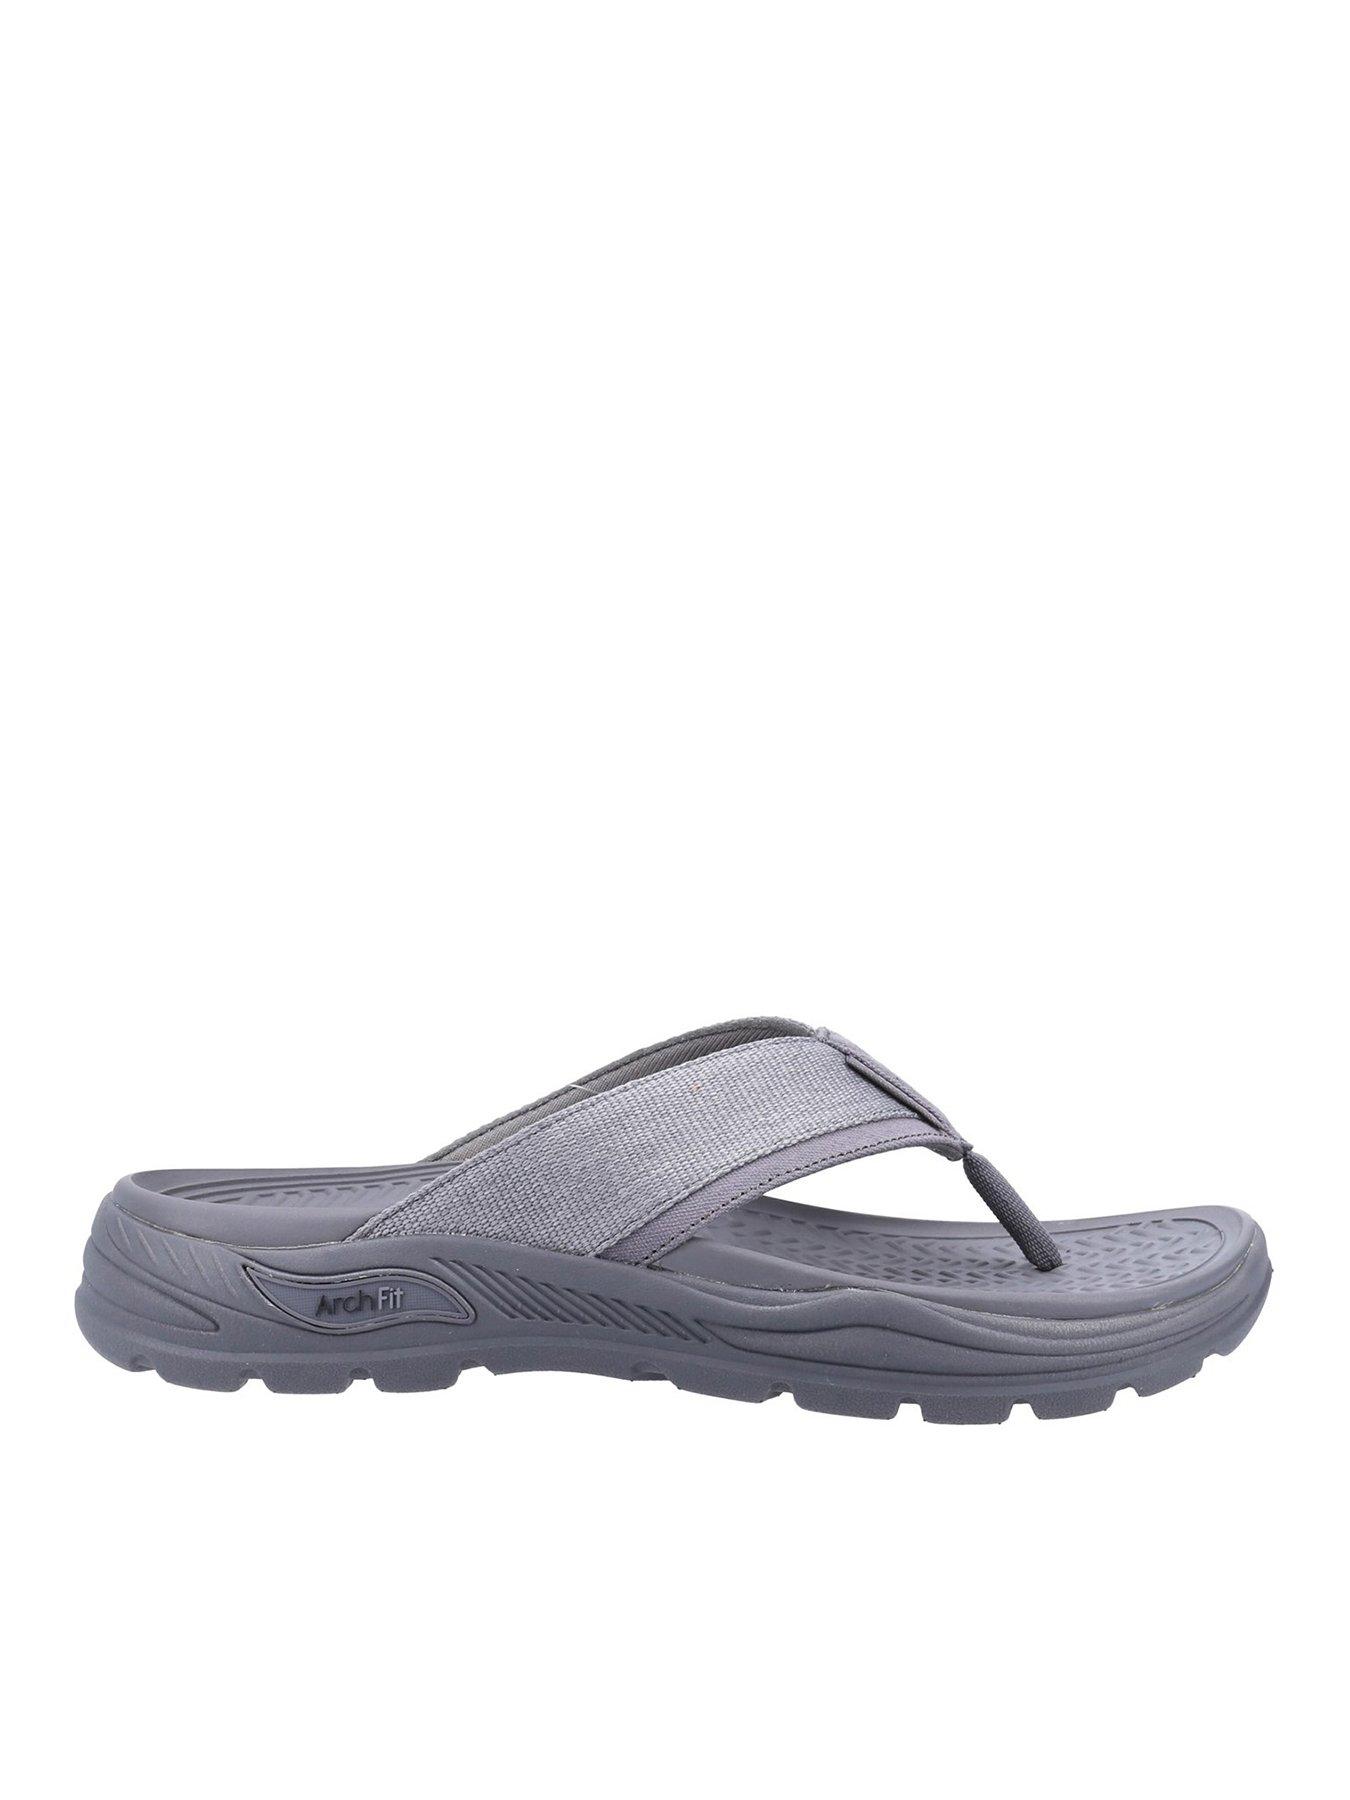 Skechers 204345 - Arch Fit Motley Sd - Dolano Sandal - Charcoal | very ...